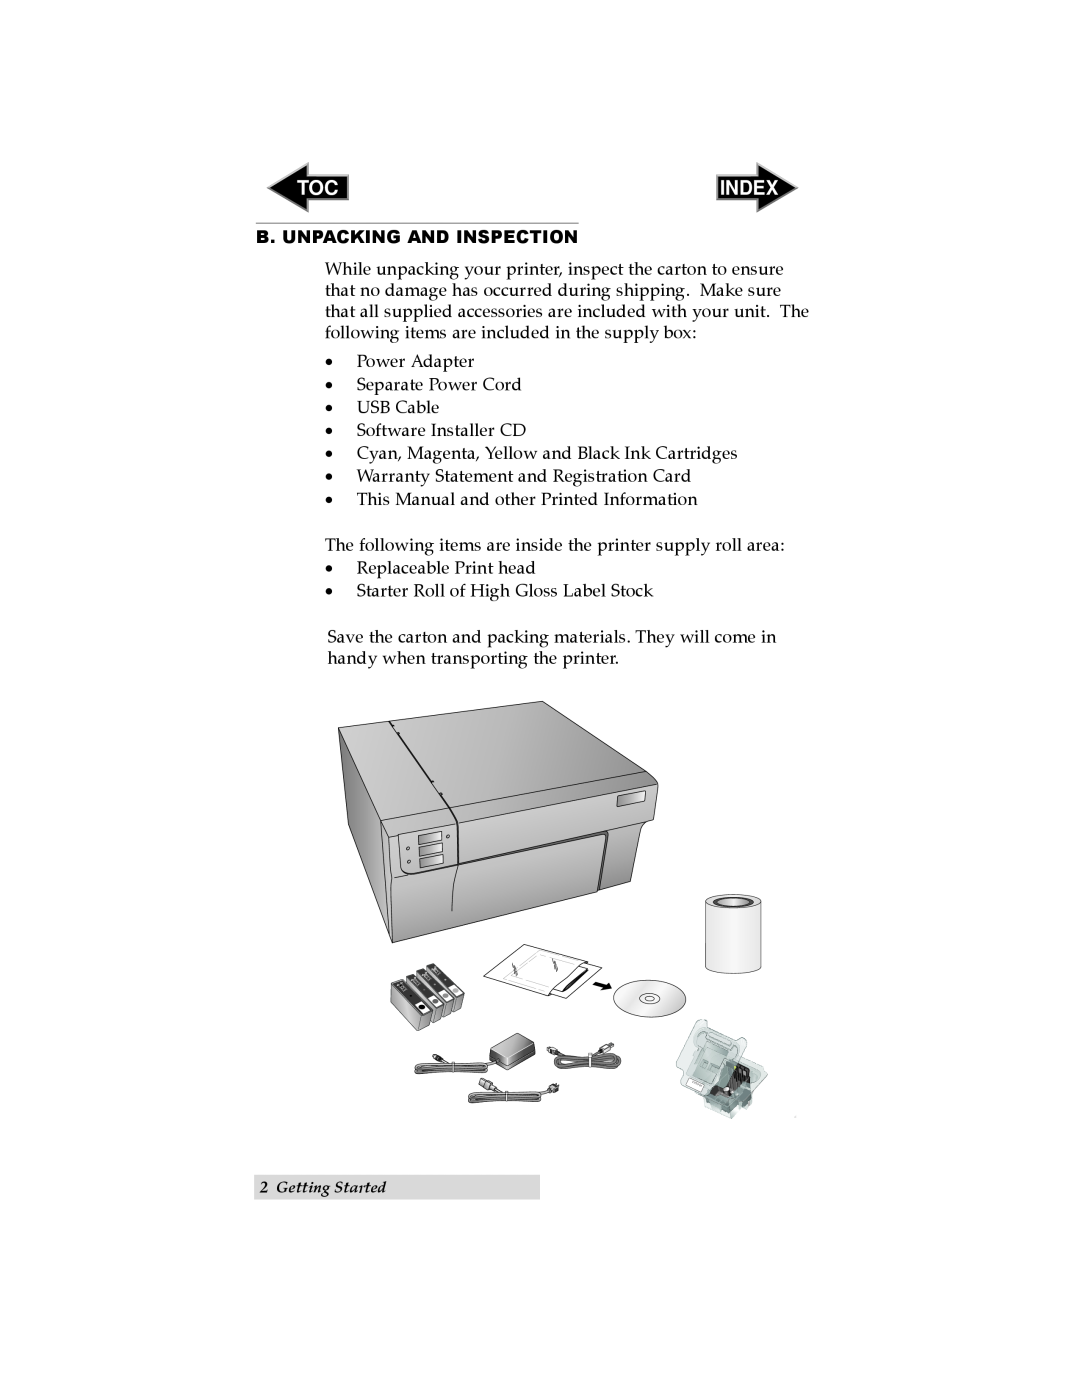 Primera Technology RX900 user manual B. Unpacking And Inspection, Index 